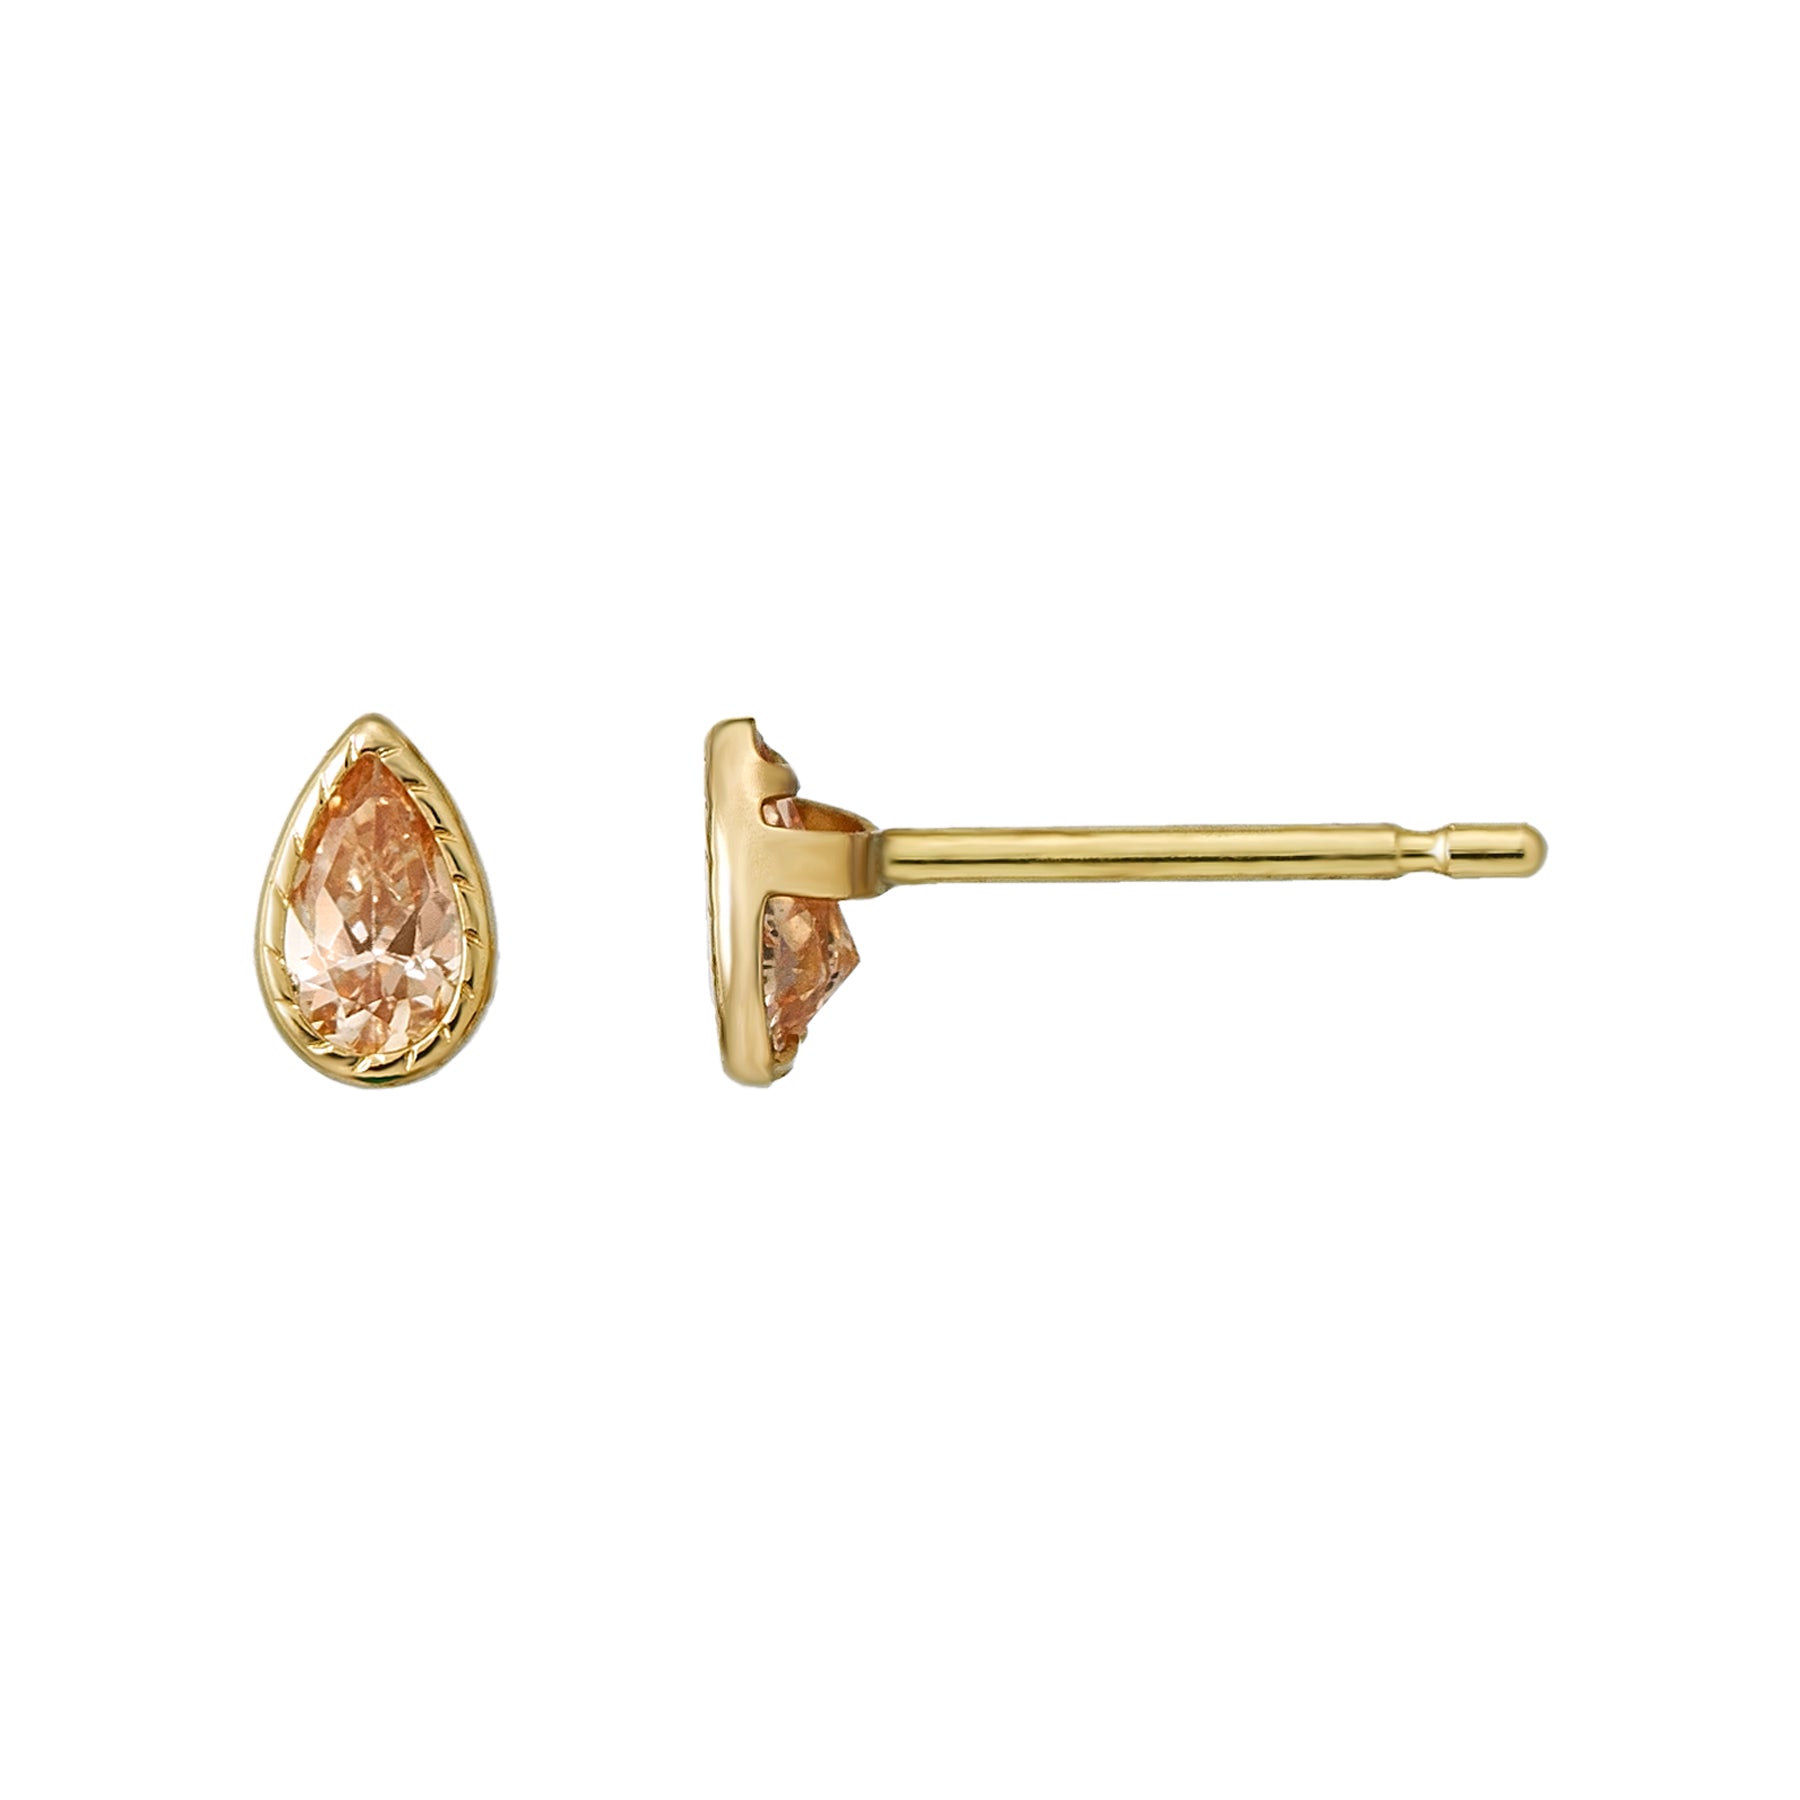 [Second Earrings] 18K Yellow Gold Champagne Color Cubic Zirconia Drop Cut Earrings - Product Image